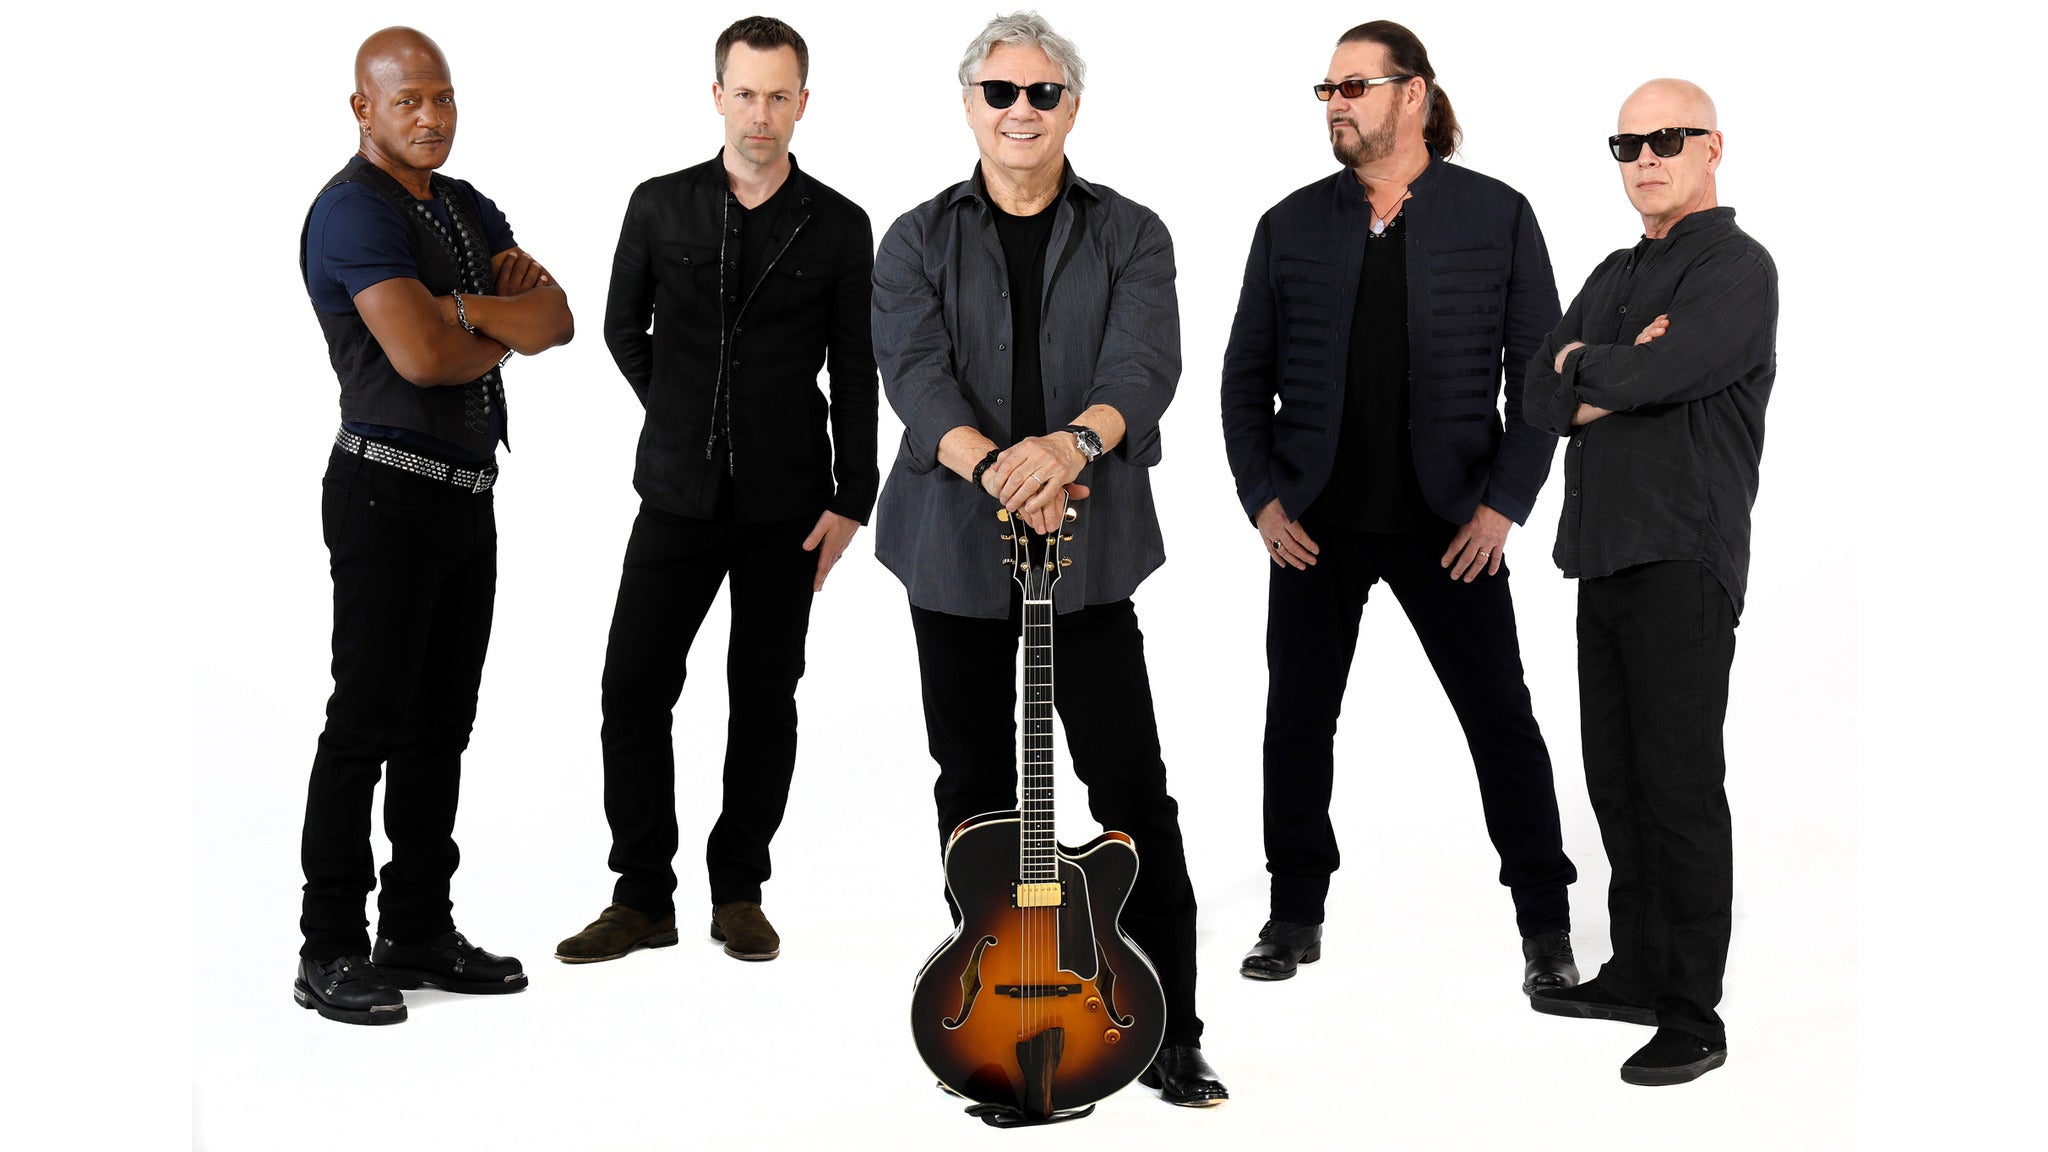 Steve Miller Band with Cheap Trick presale code for concert tickets in Kansas City, MO (Starlight Theatre)